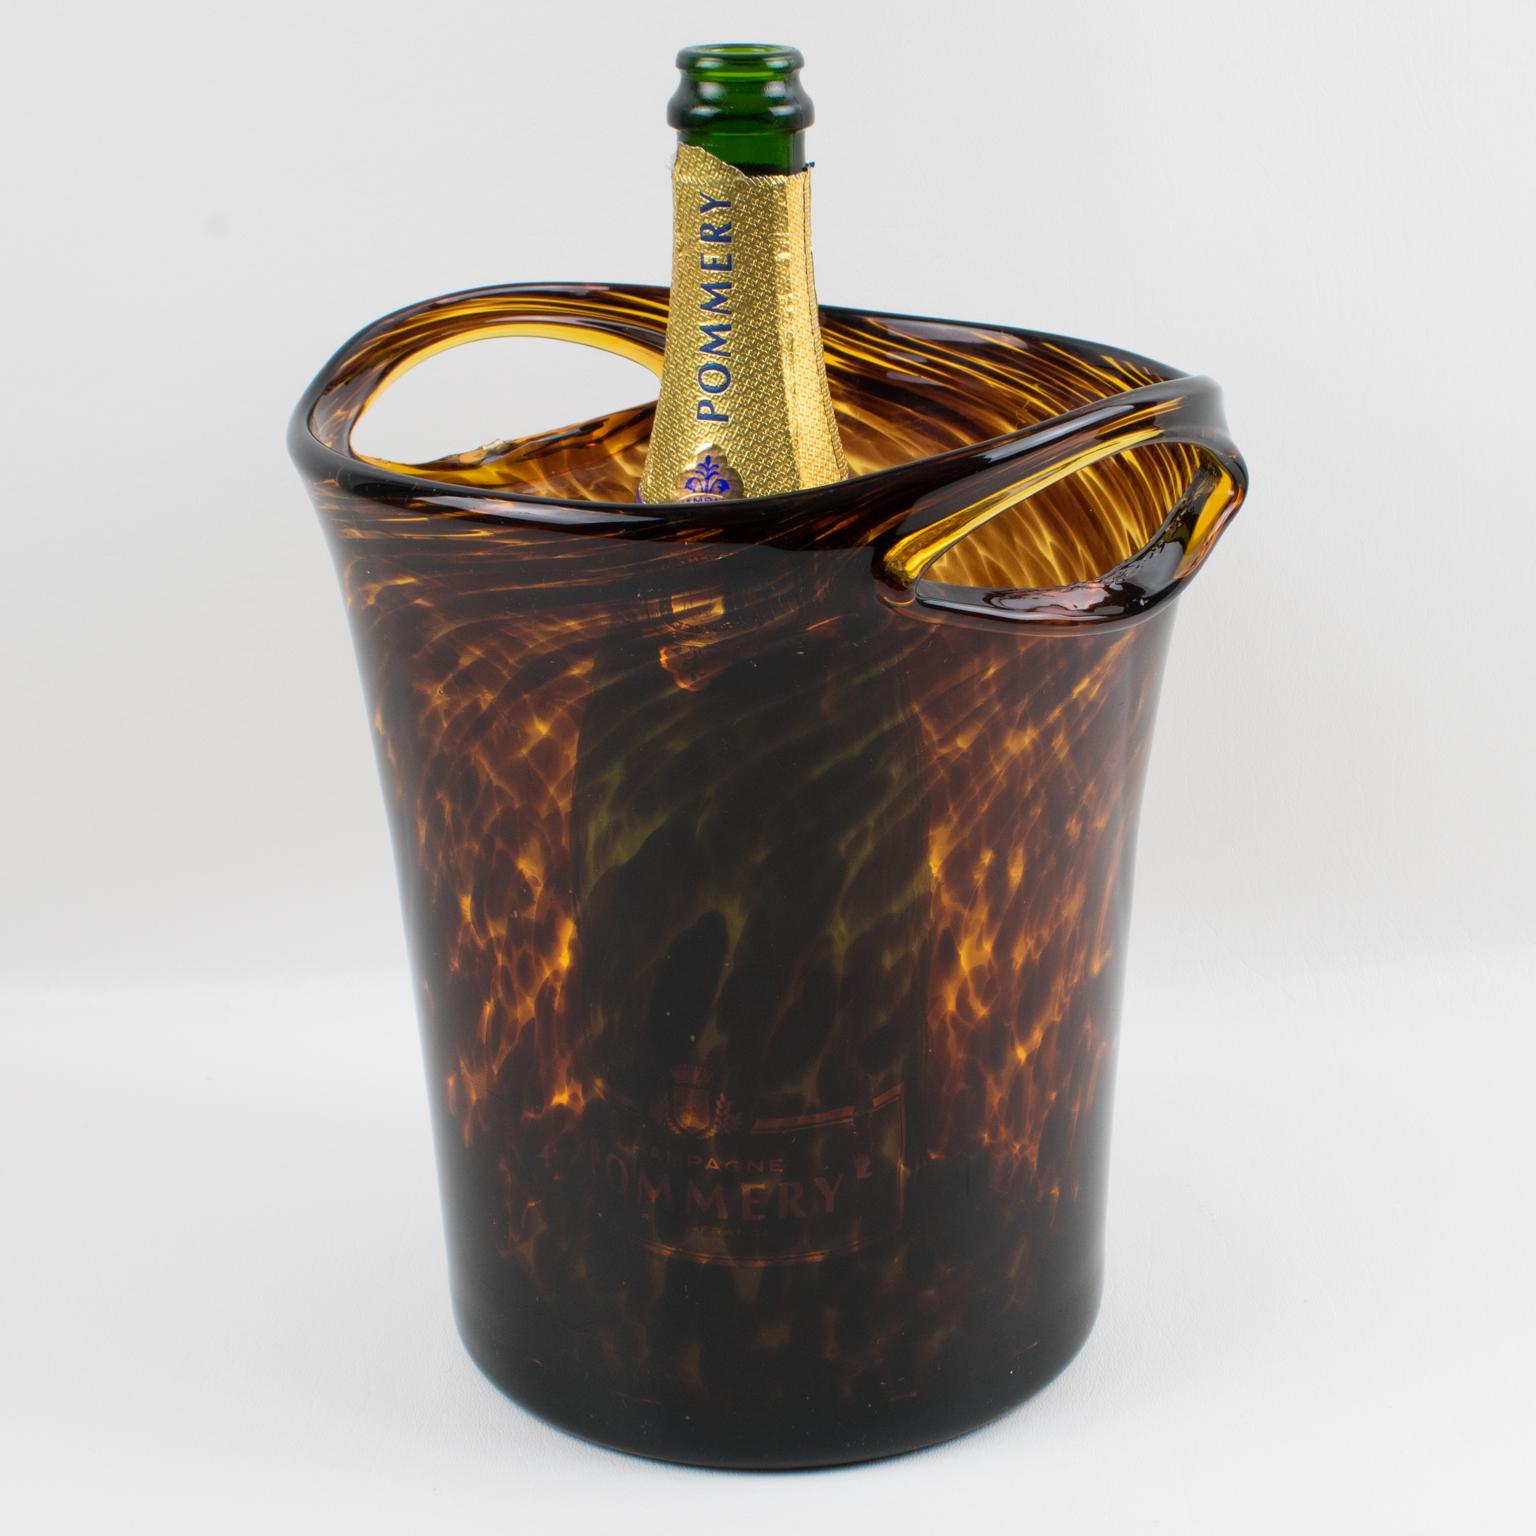 1960s French designer Christian Dior glass champagne cooler or wine cooler or ice bucket. From the Dior Home Collection, mouth-blown in Empoli, Italy, with the exclusive tortoiseshell color flowing pattern. Polished pontil mark on the bottom along